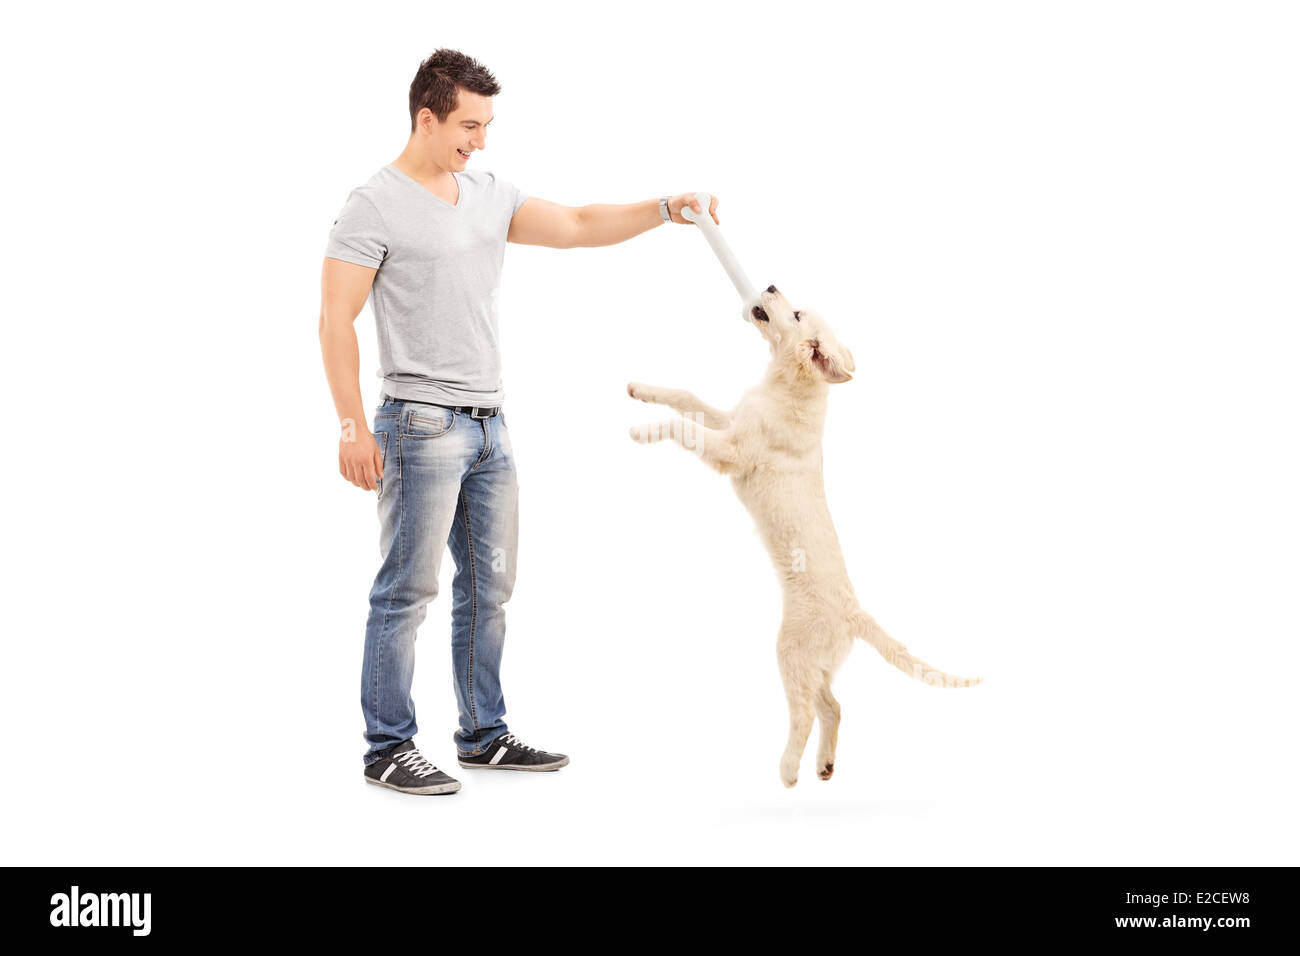 Full length portrait of a young man holding a bone and playing with a puppy Stock Photo